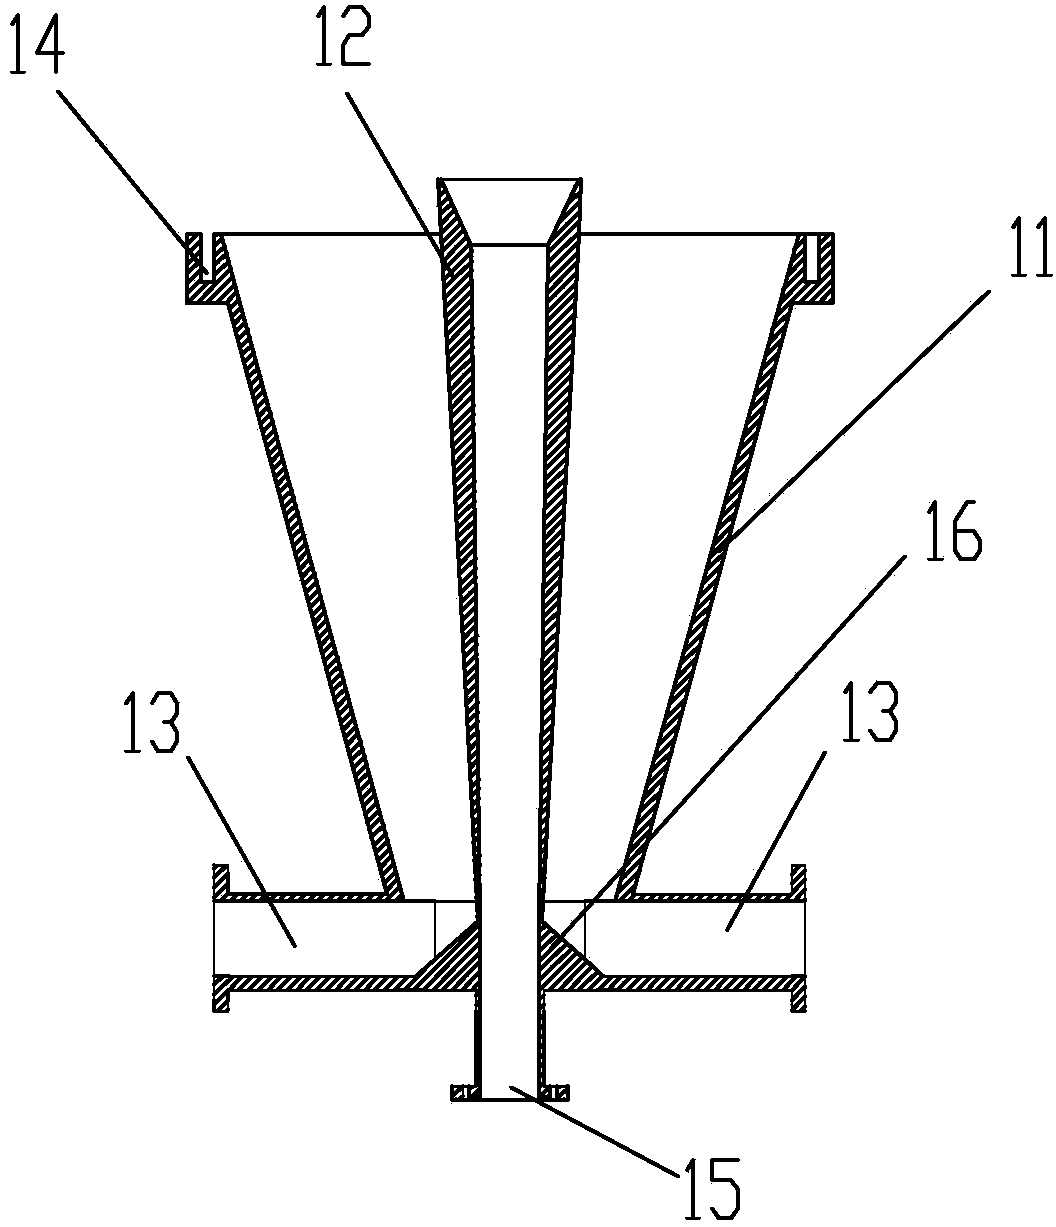 Coaxial S/X dual-frequency sharing feed source network